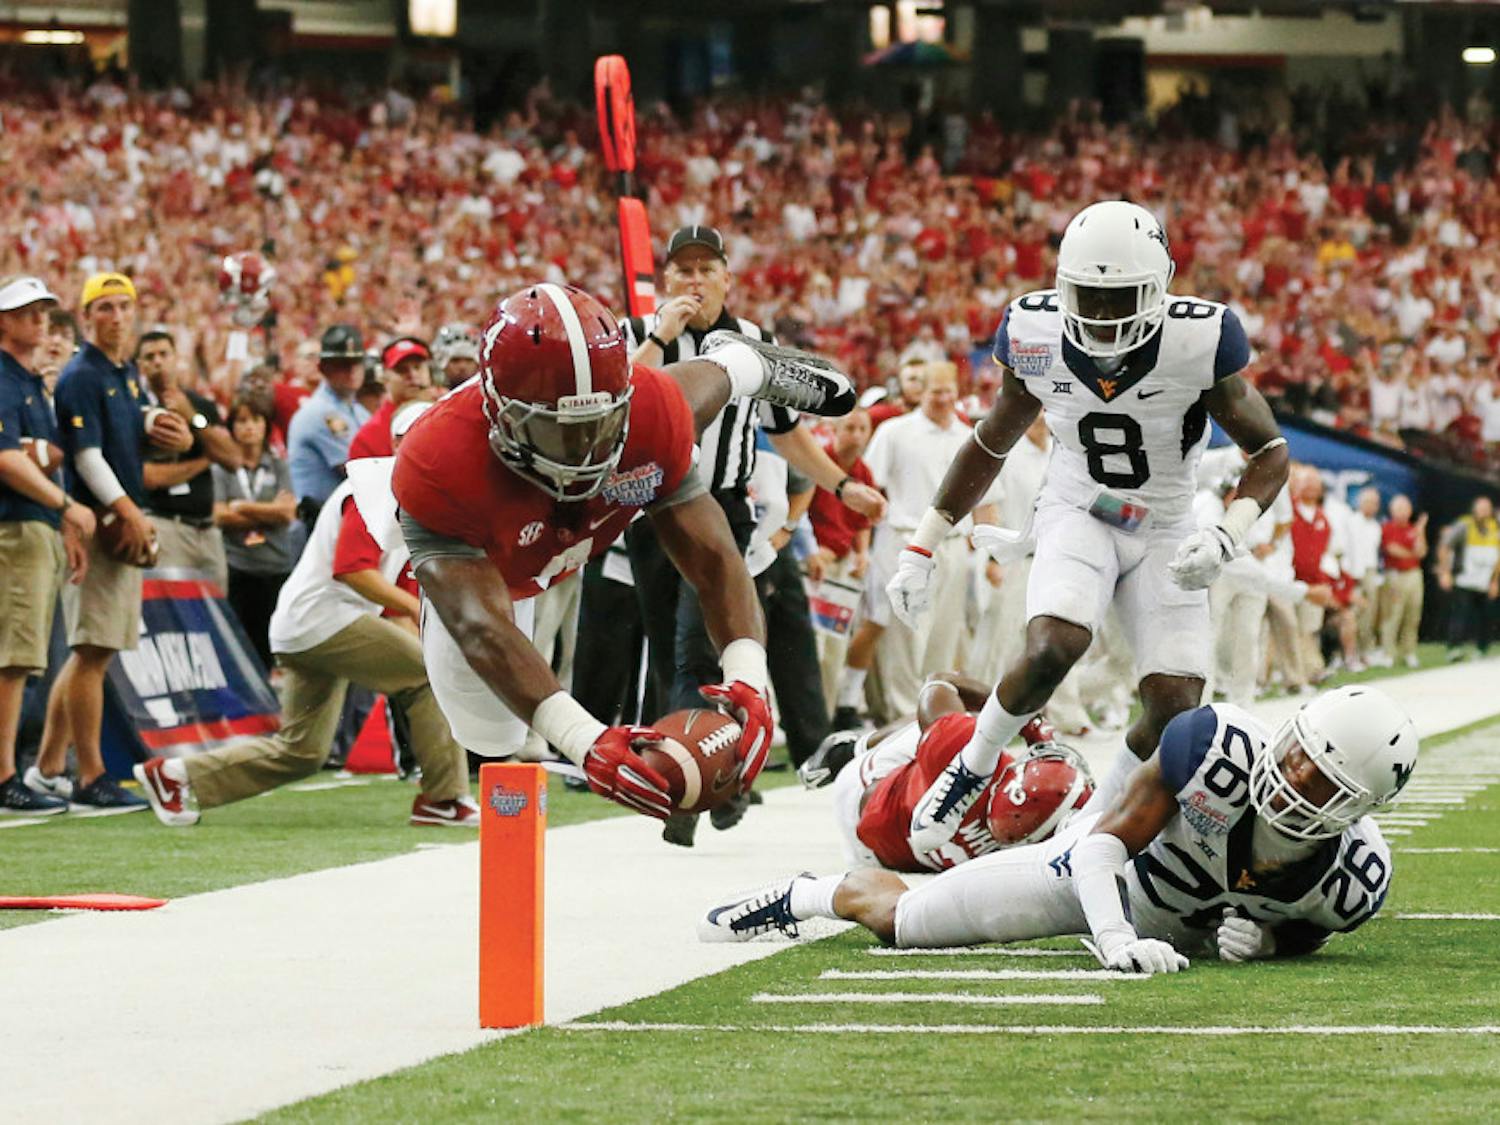 Alabama running back T.J. Yeldon (4) dives into the end zone for a touchdown as West Virginia's Travis Bell (26) and Karl Joseph (8) defend in the first half of an NCAA college football game Saturday, Aug. 30, 2014, in Atlanta.